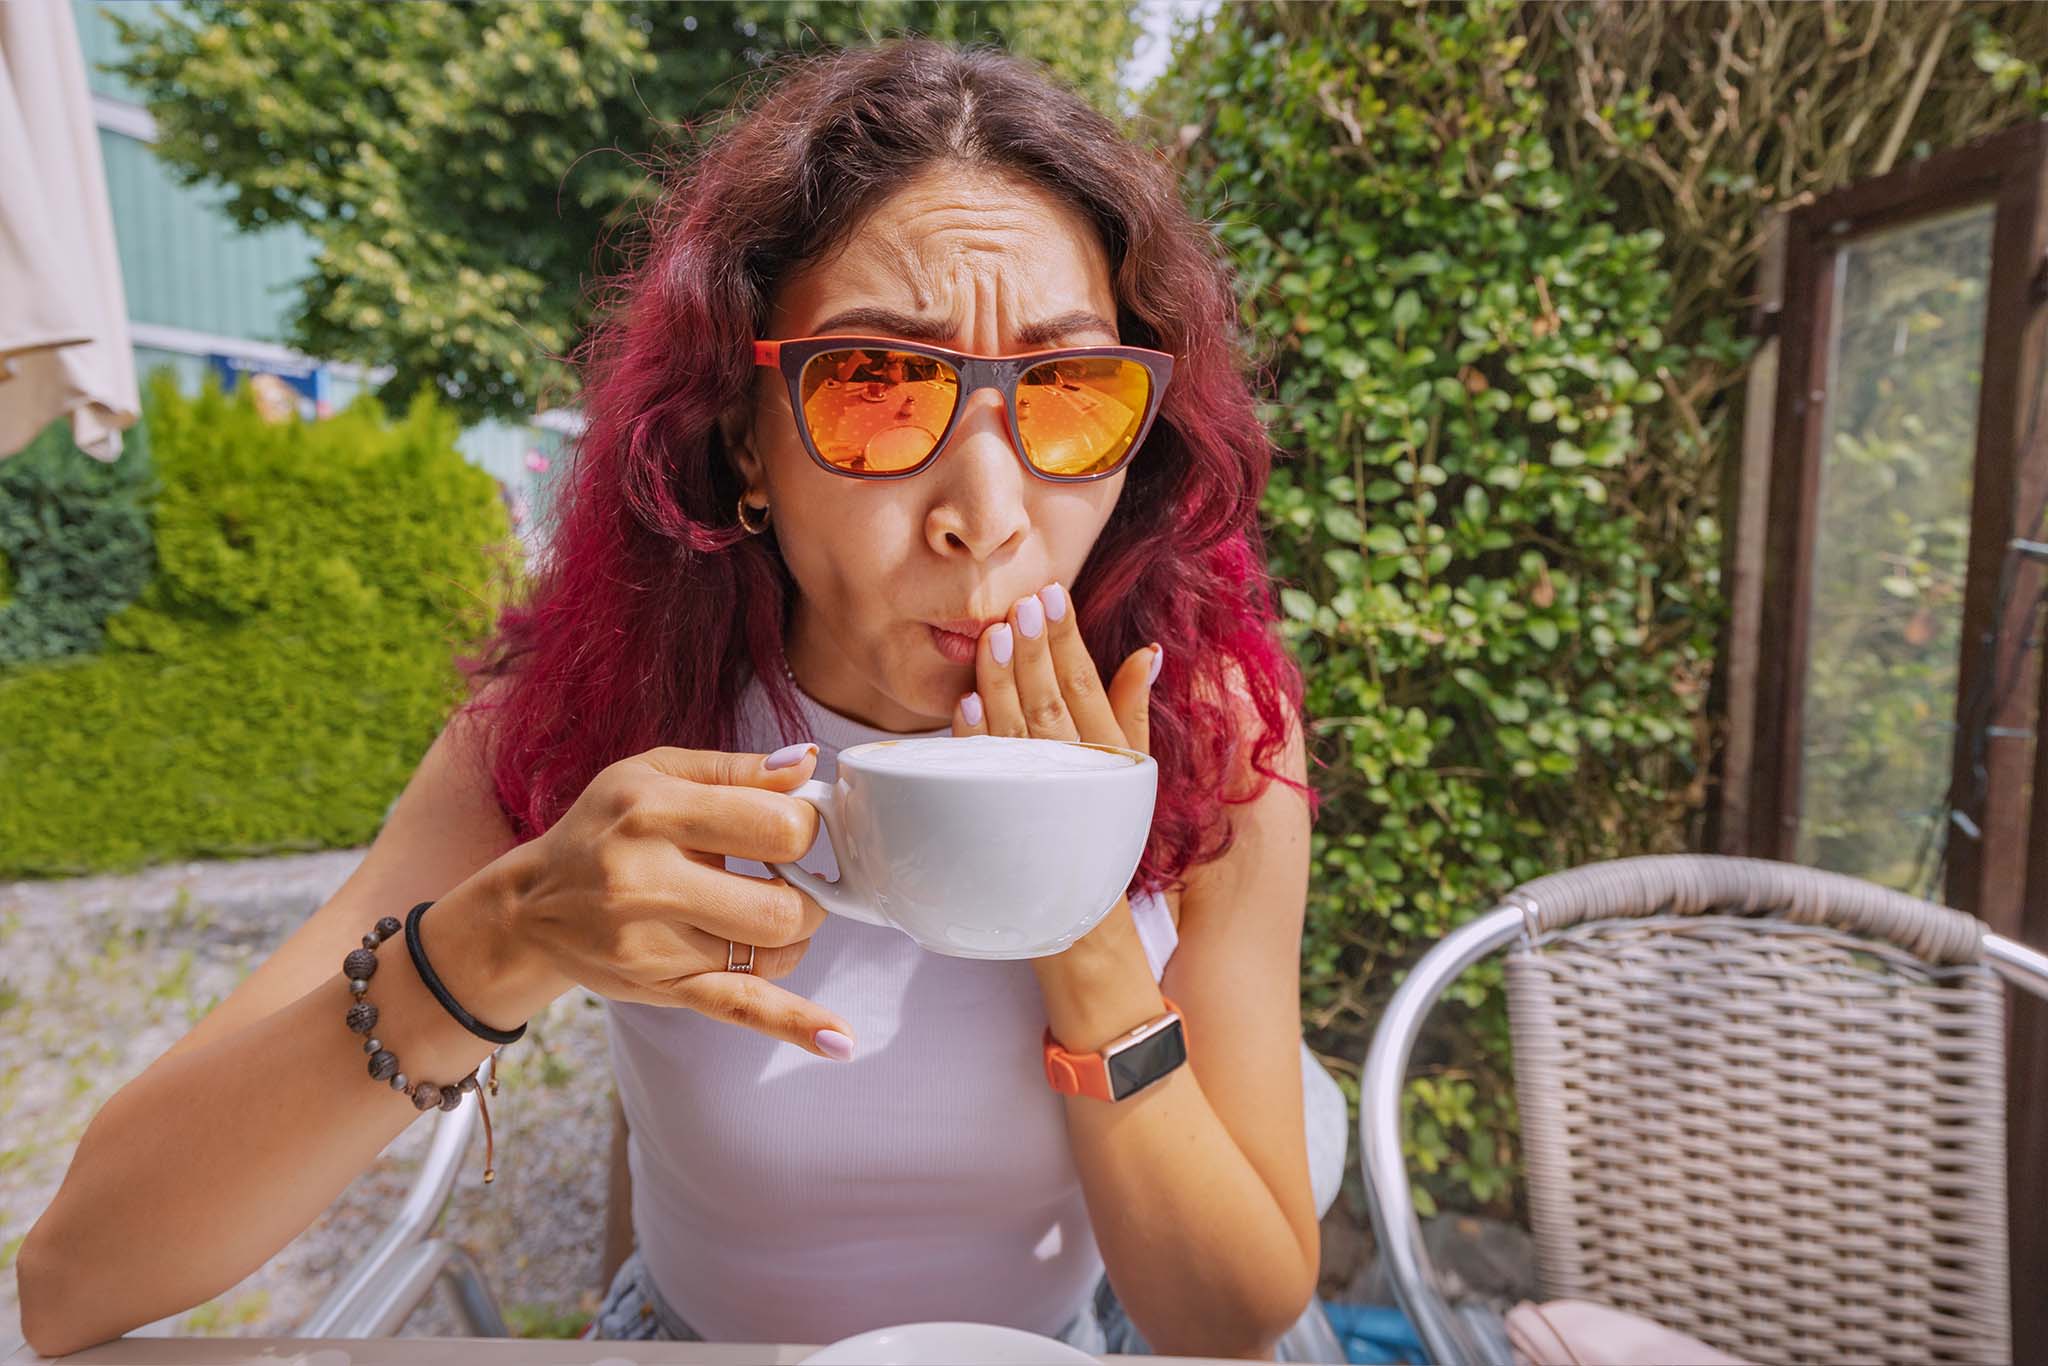 A picture of a red-haired woman who burned her mouth drinking coffee.